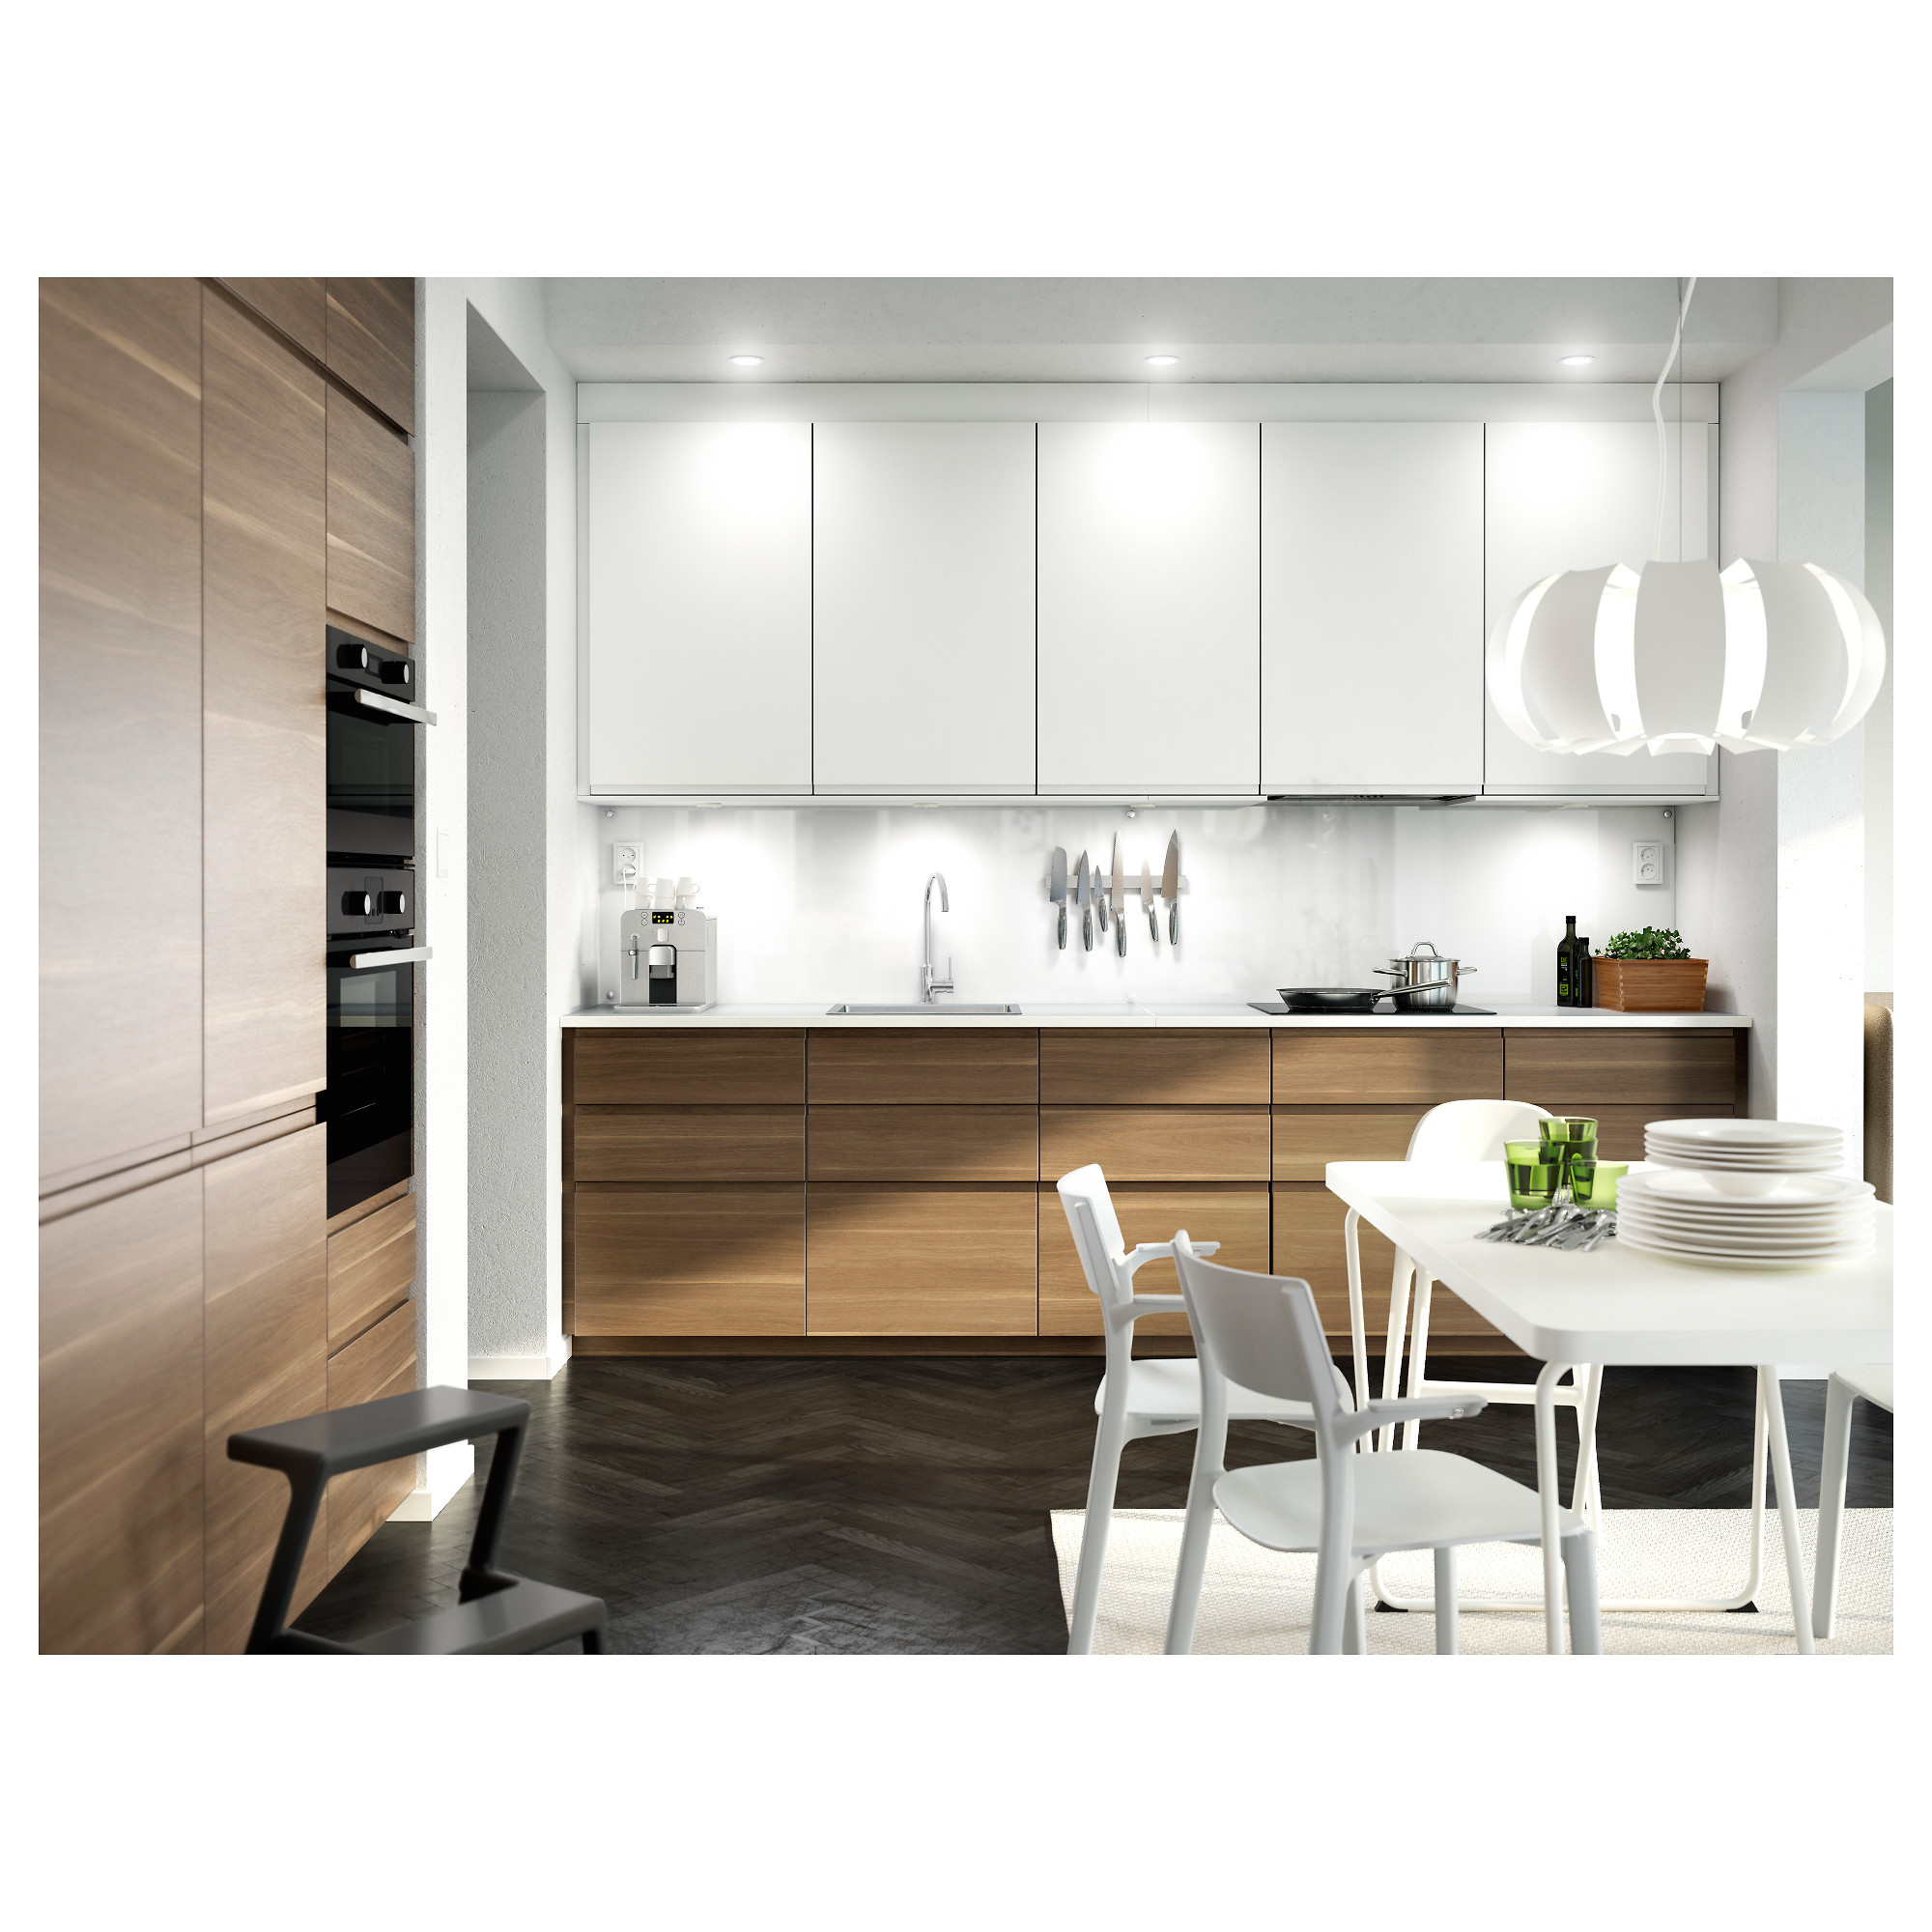 image result for ikea voxtorp kitchen cost